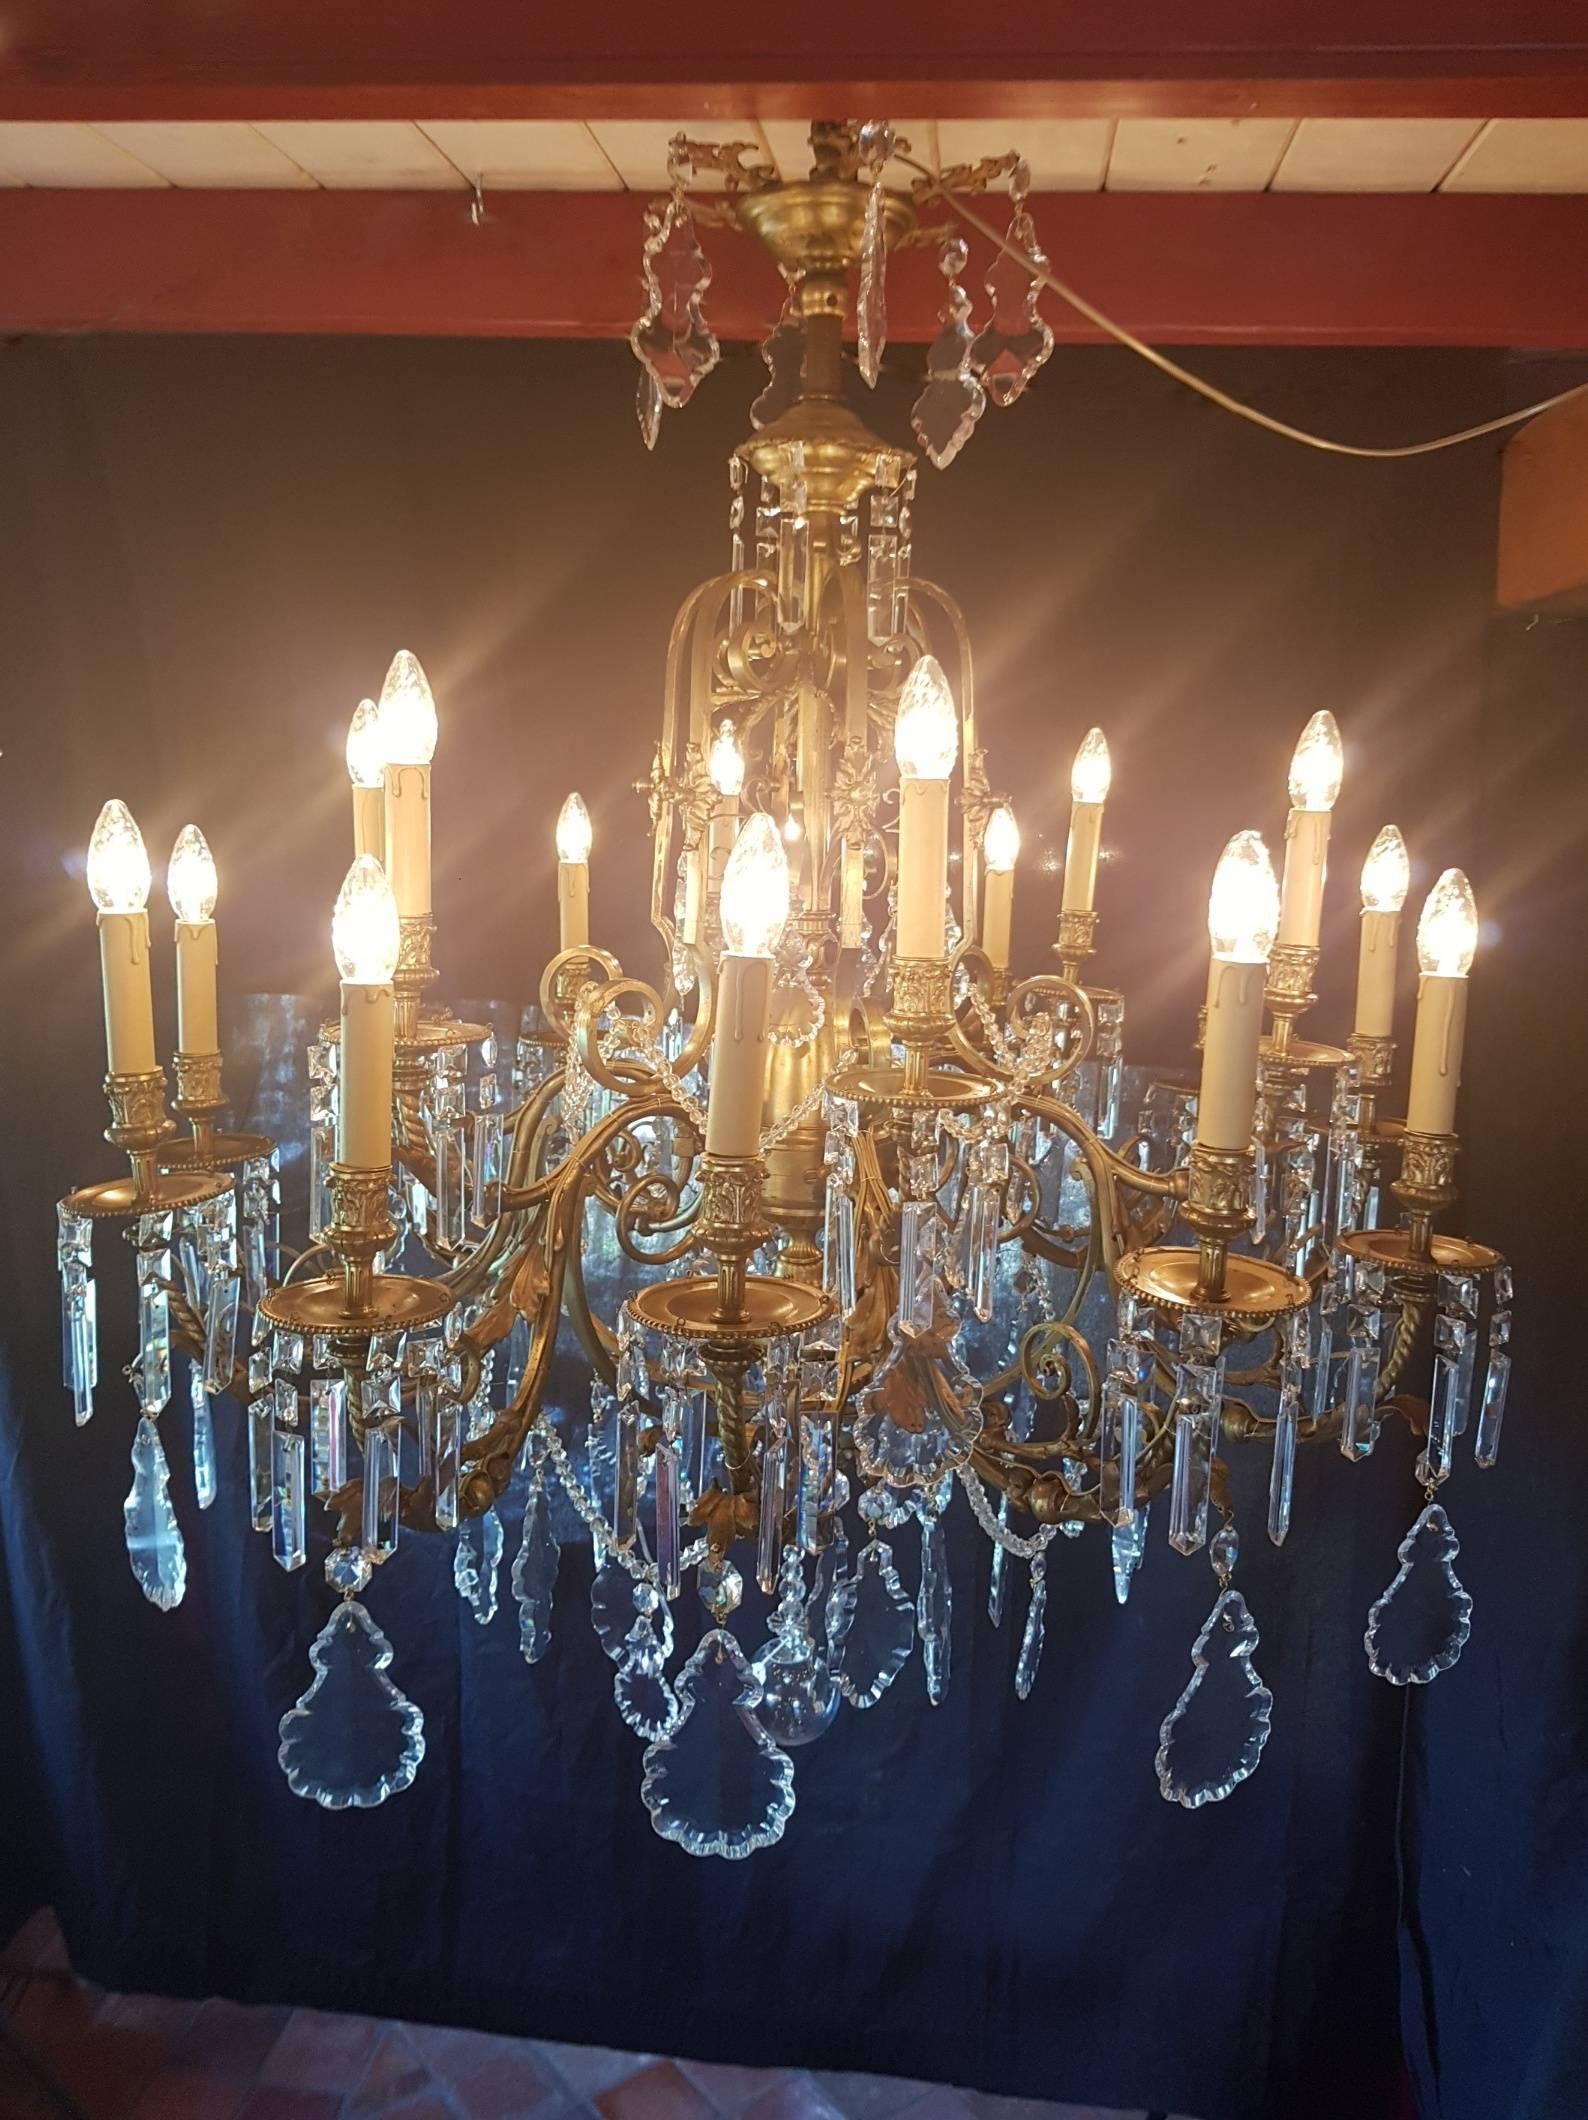 Large French brass chandelier converted from gas to electricity. This big model has 18 lights and is richly decorated with nice glass and crystal pendeloques.

This is just one of our large collection chandeliers. Besides the old and antique